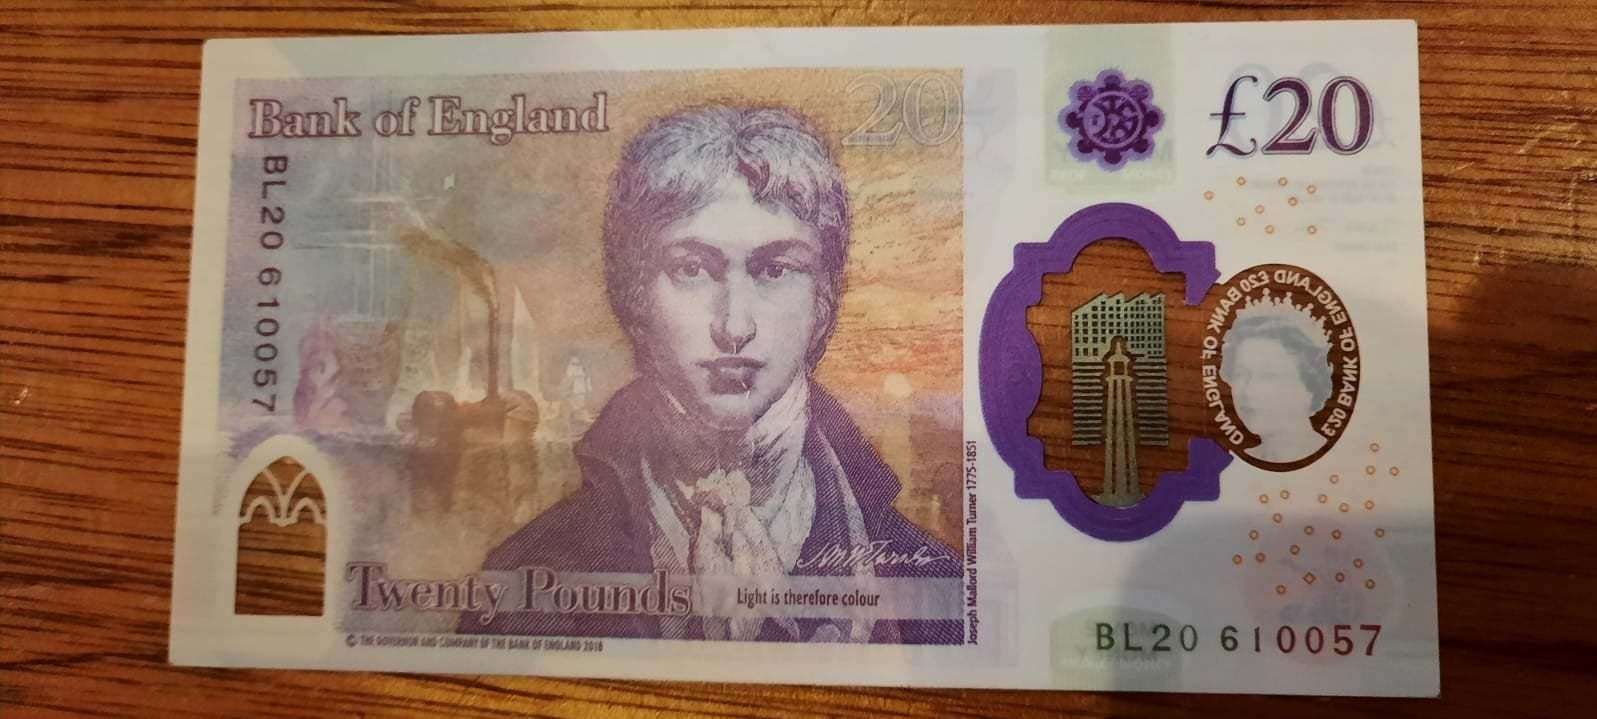 Fake bank notes are in circulation in Inverness.